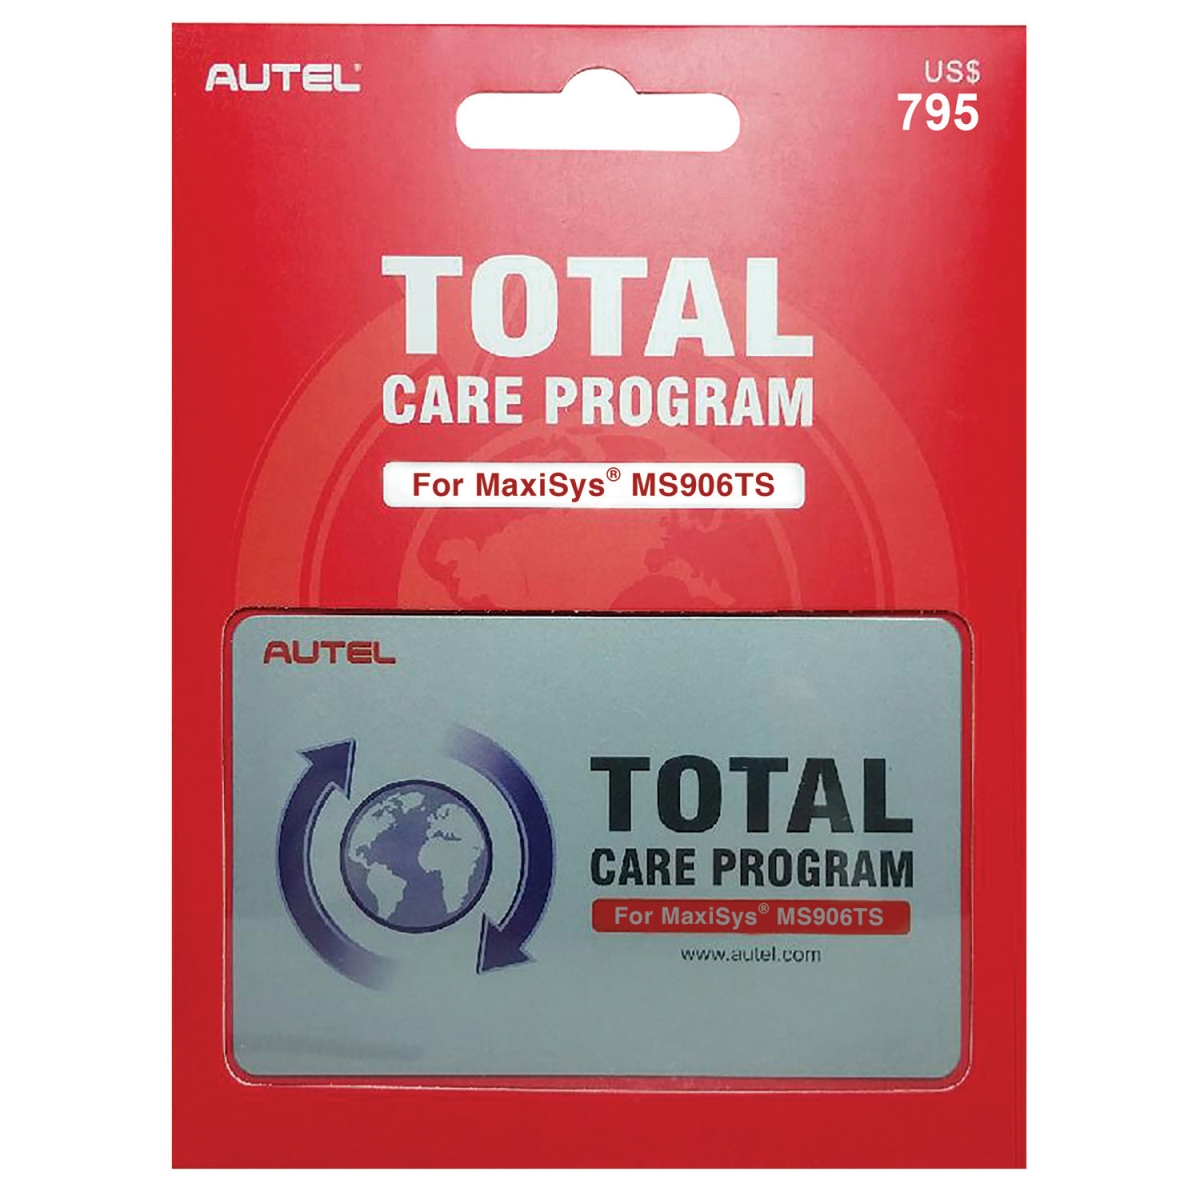 Picture of Autel AUL-MS906TS1YRUP Maxisys 1 Year Total Care Program Subscription & Warranty Card